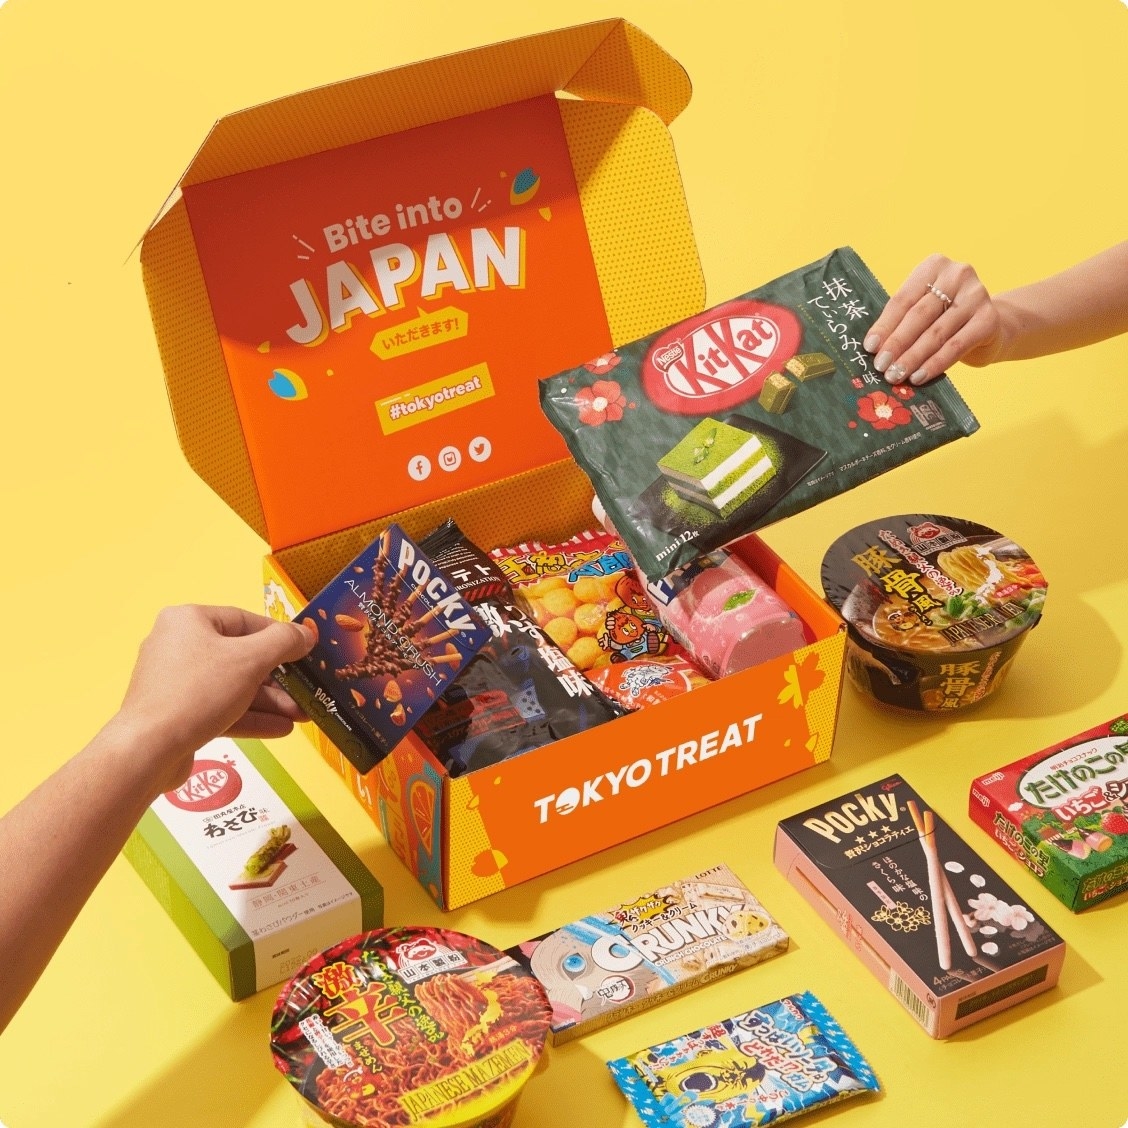 A Tokyo Treat box filled with assorted snacks, with hands holding packages of Pocky and KitKats